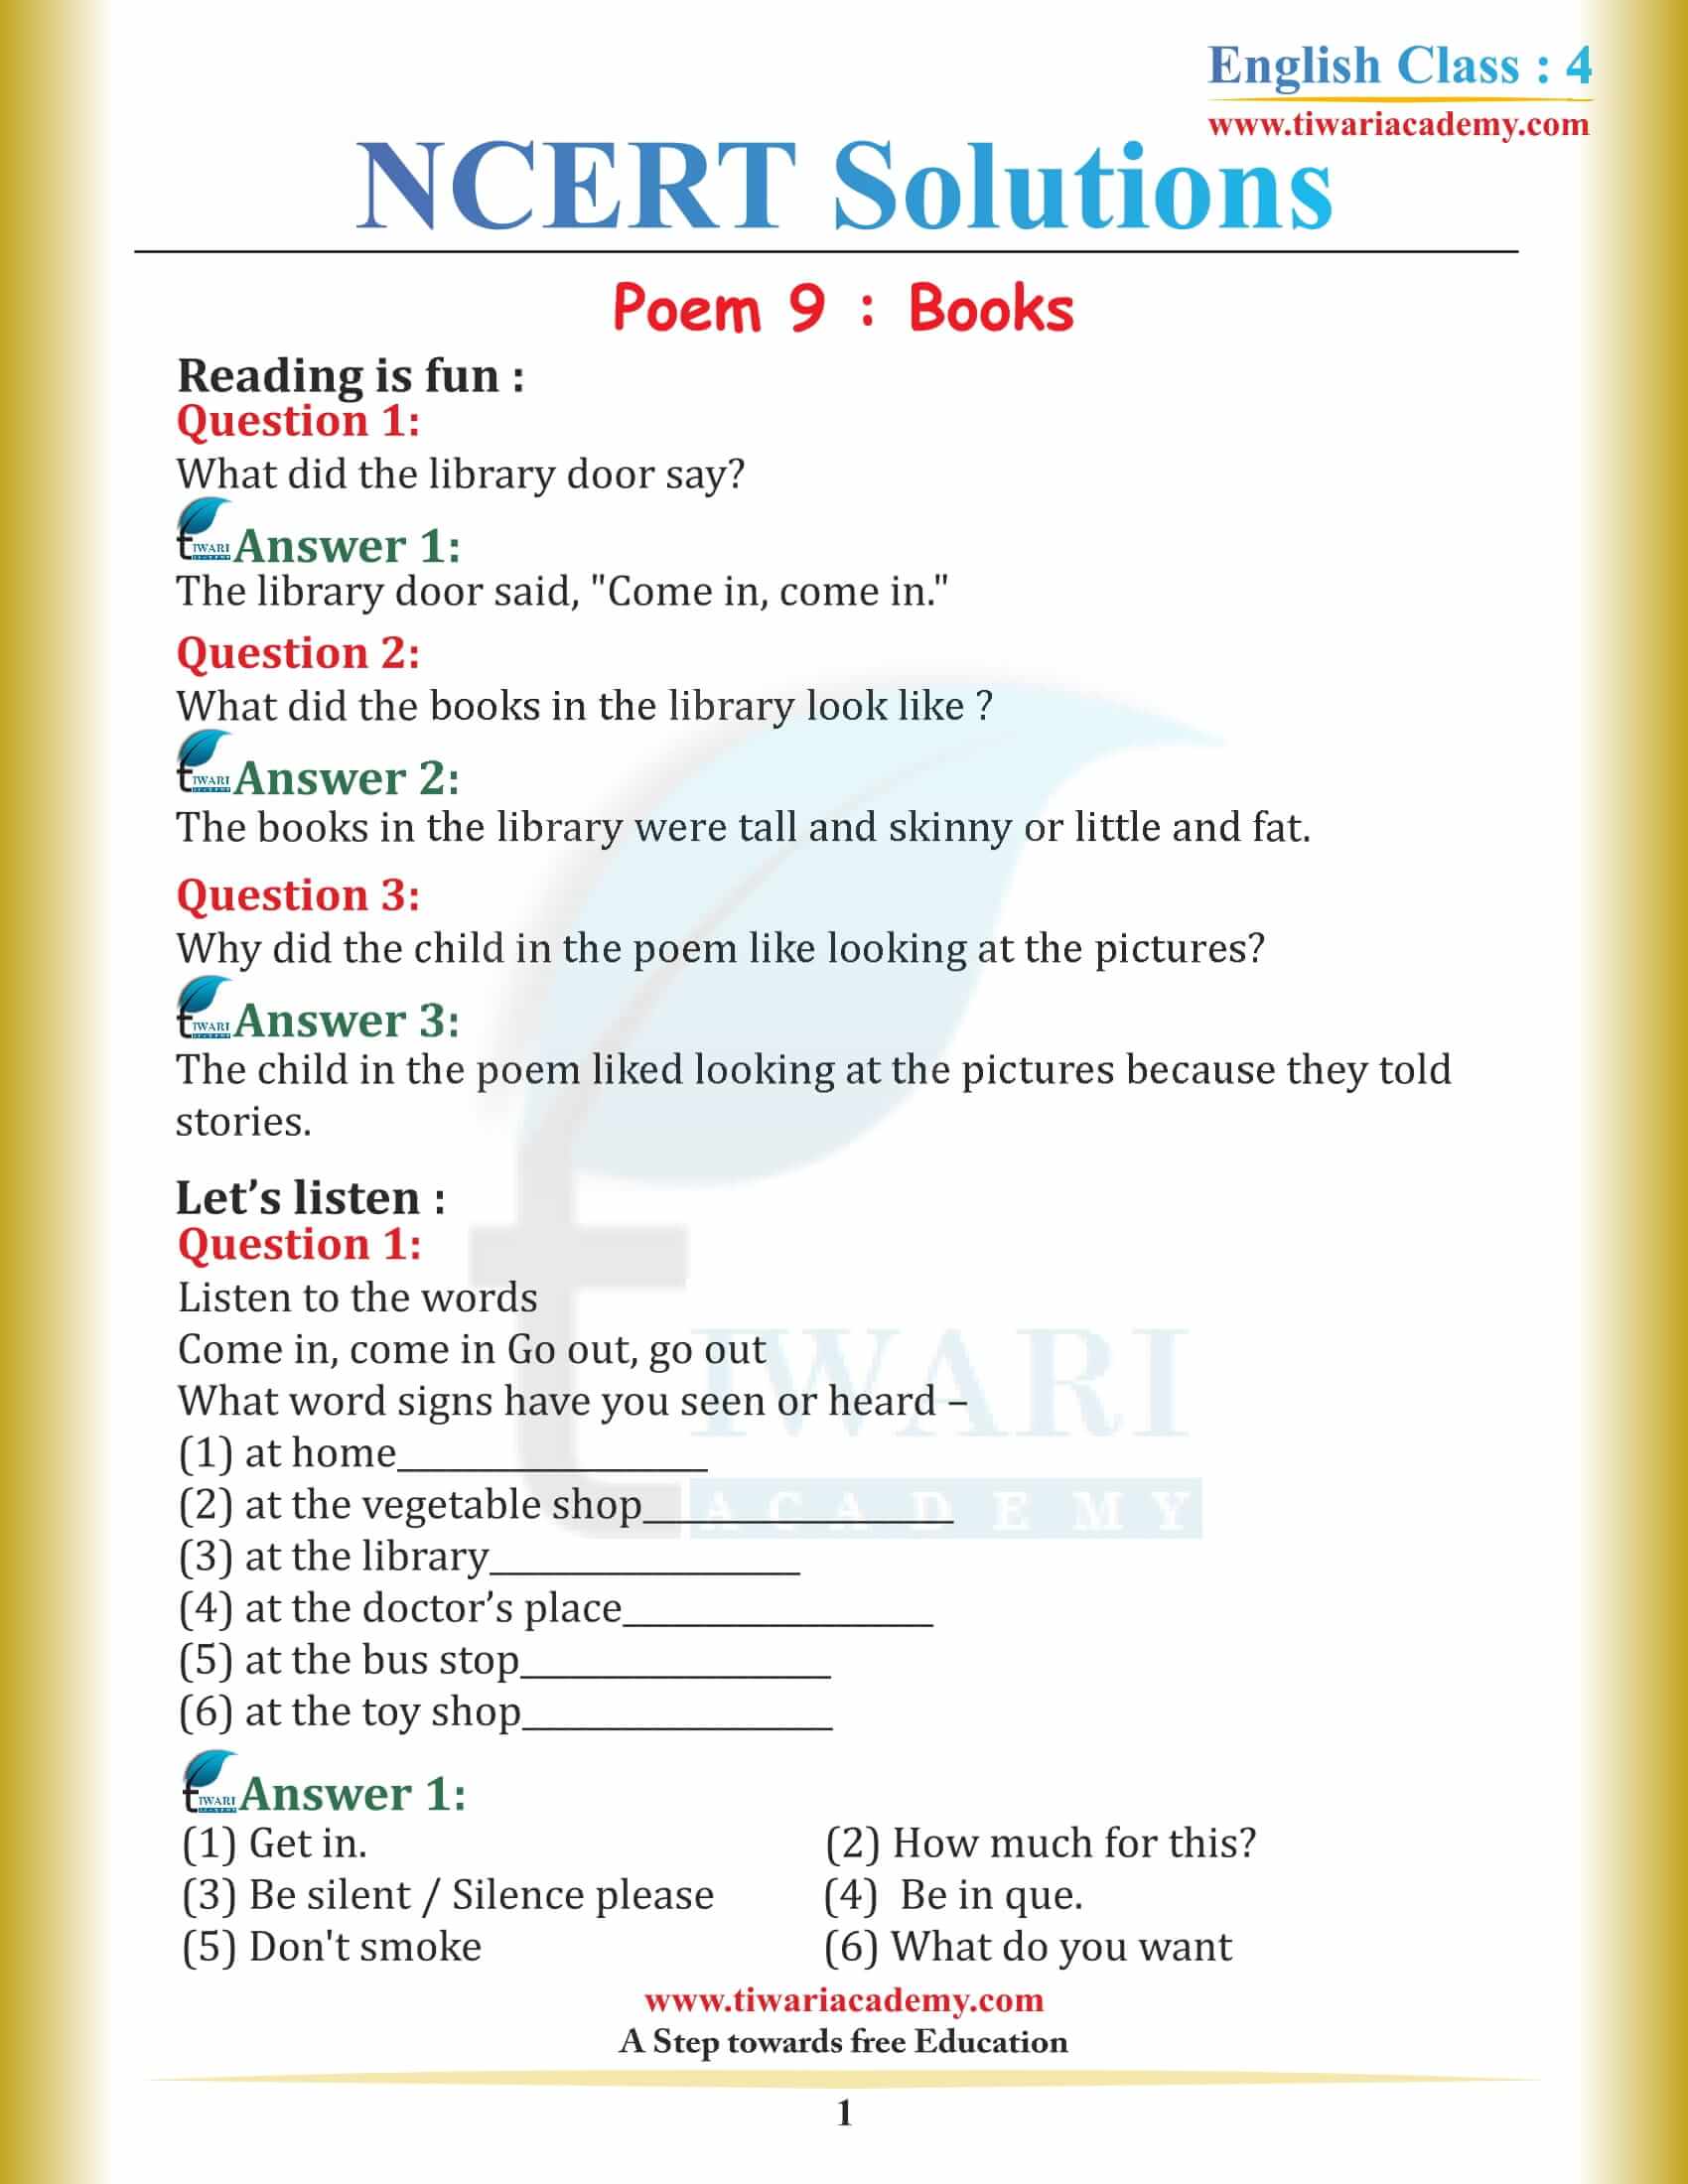 NCERT Solutions for Class 4 English Unit 9 Chapter 1 Books